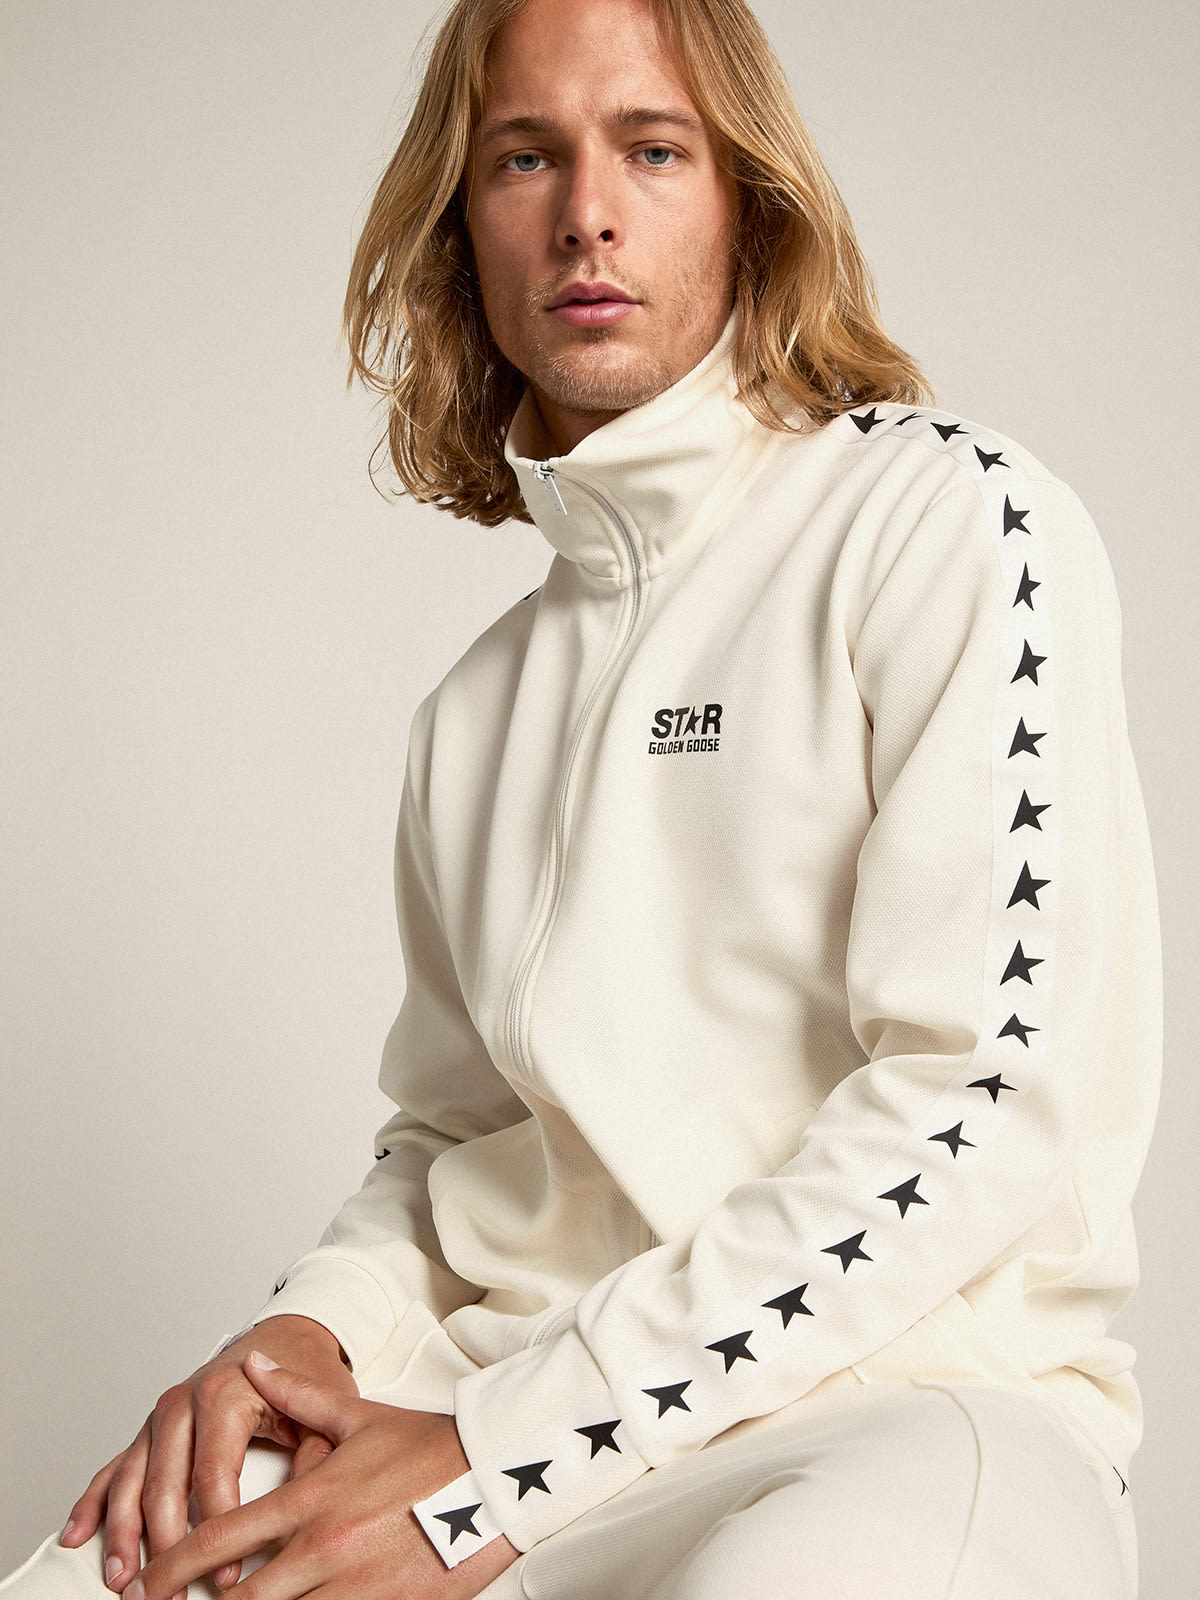 Golden Goose - Men’s white zipped sweatshirt with white strip and black stars in 